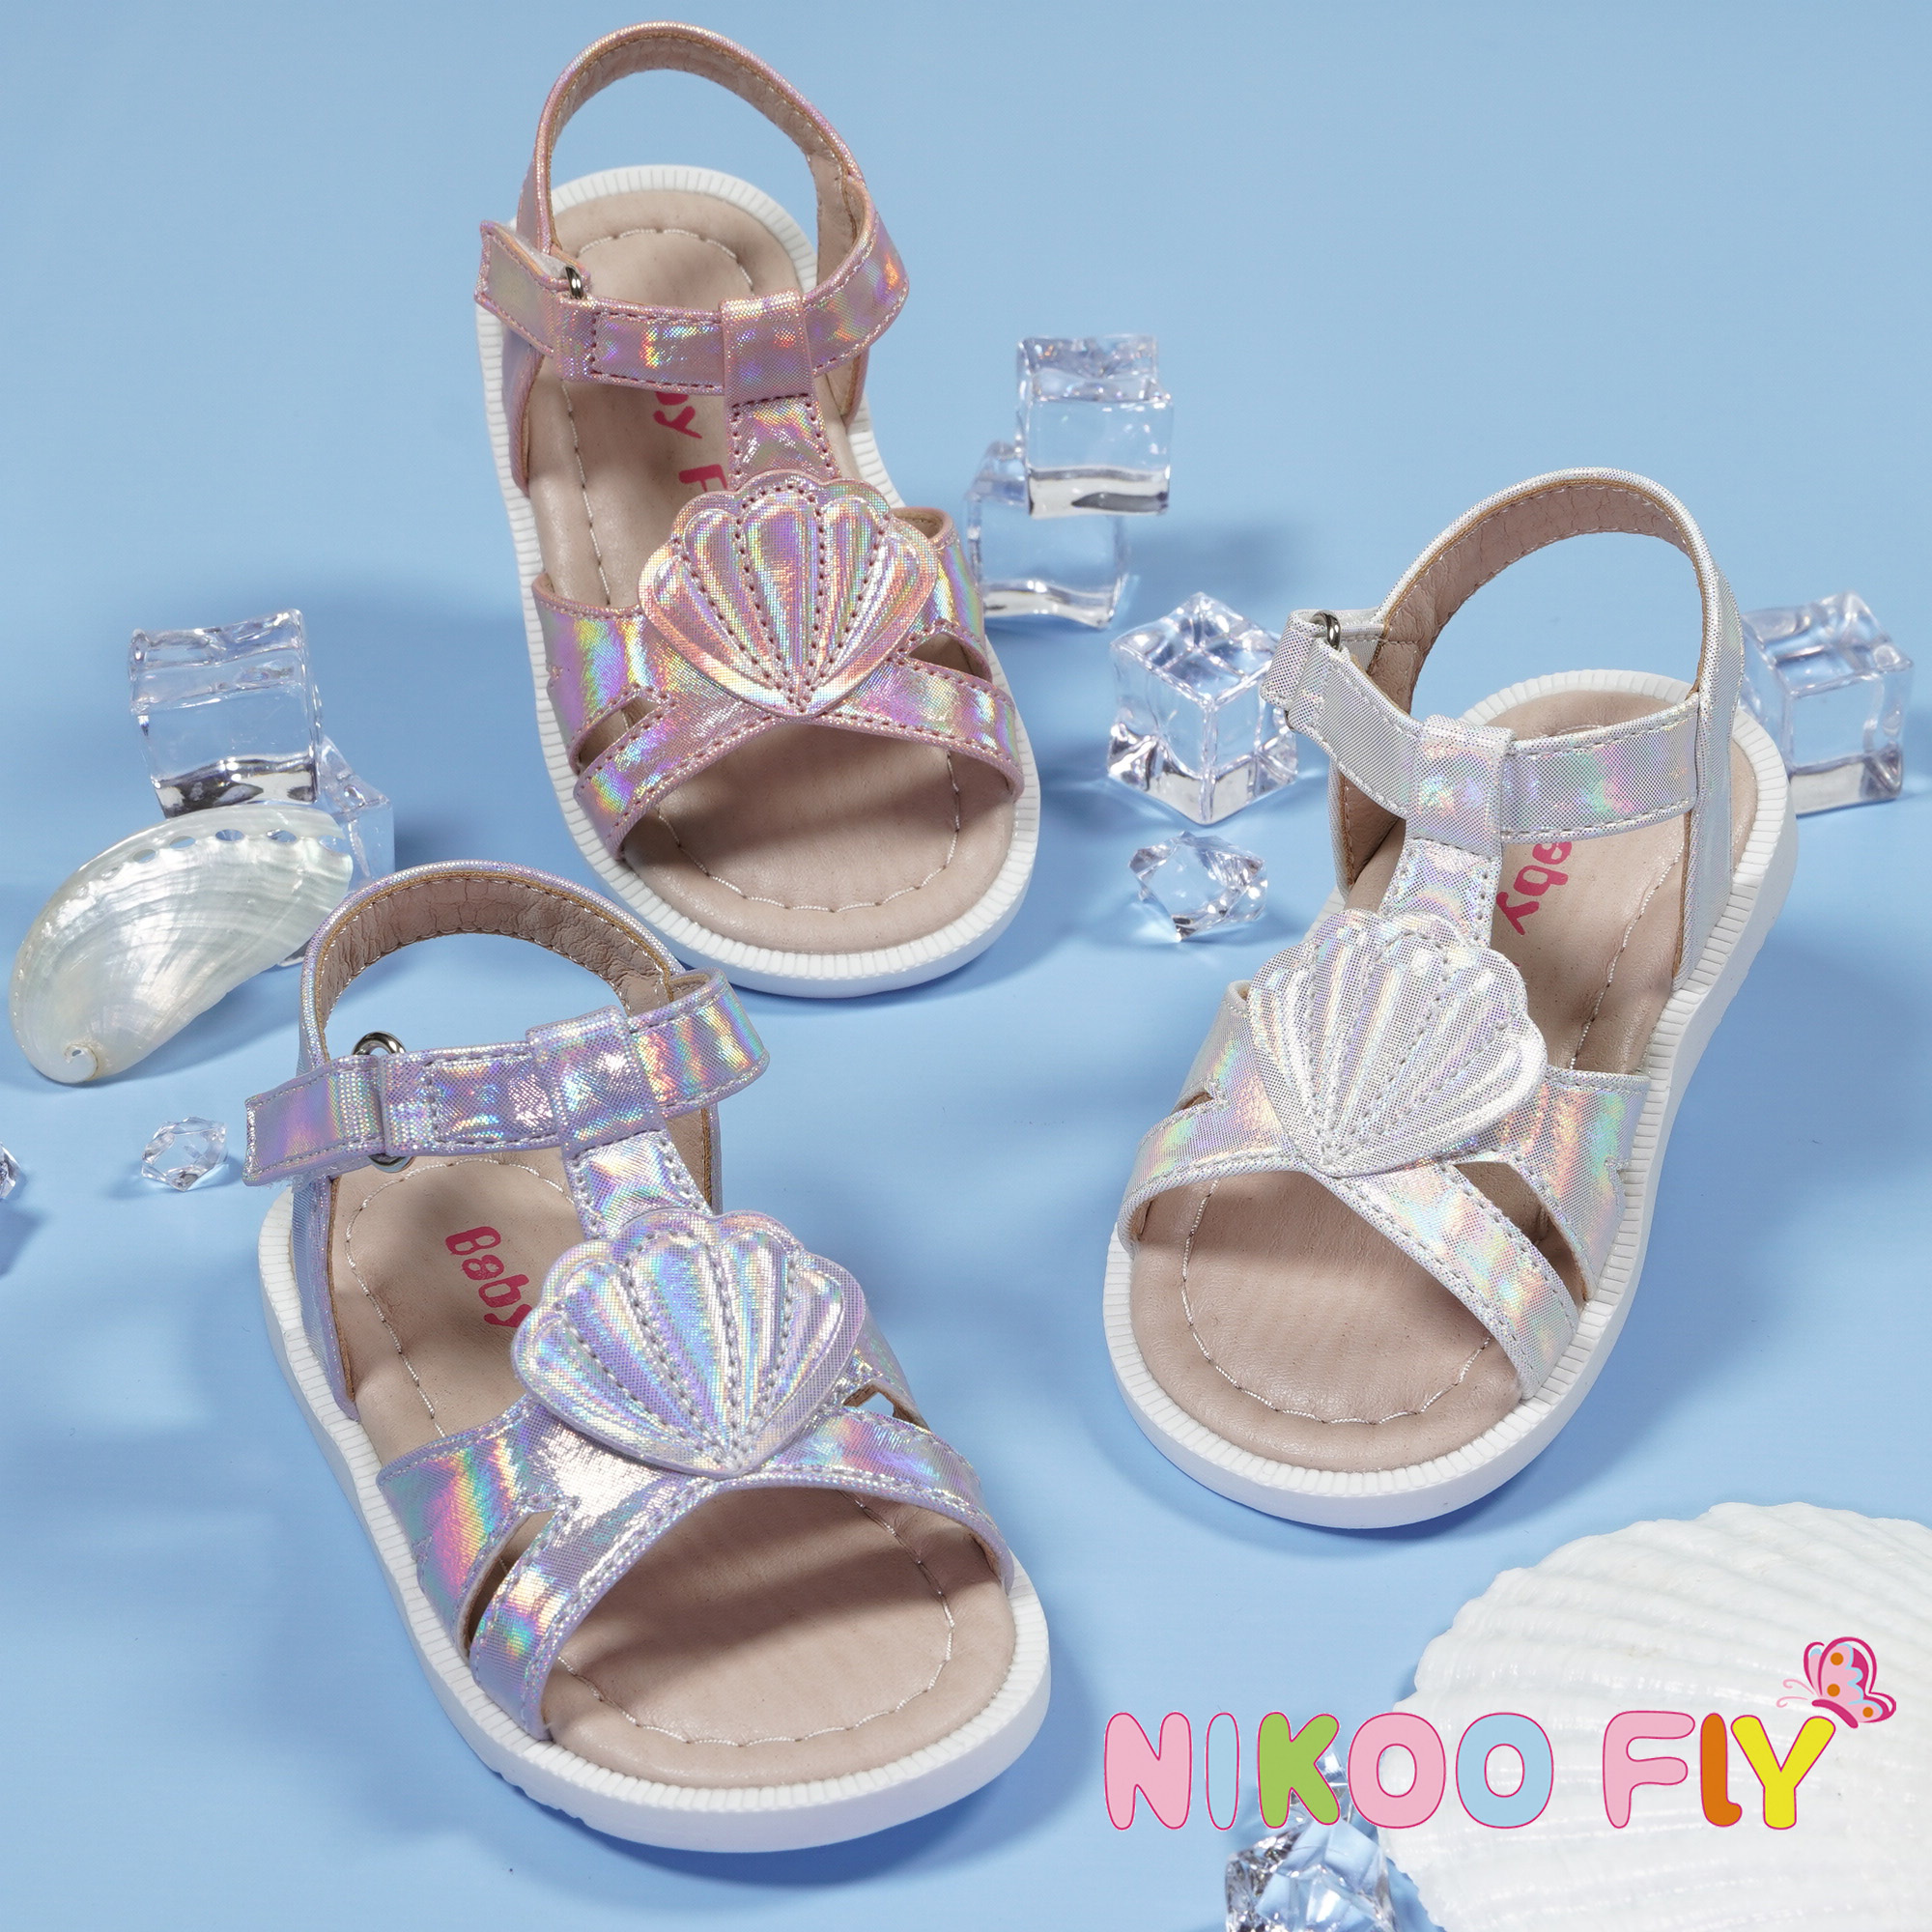 Shell-Sandals-Sandals-in-Holographic-Velcro-Sandal-YDX0526E-4-shantou-yidaxing-nikoofly-shoes